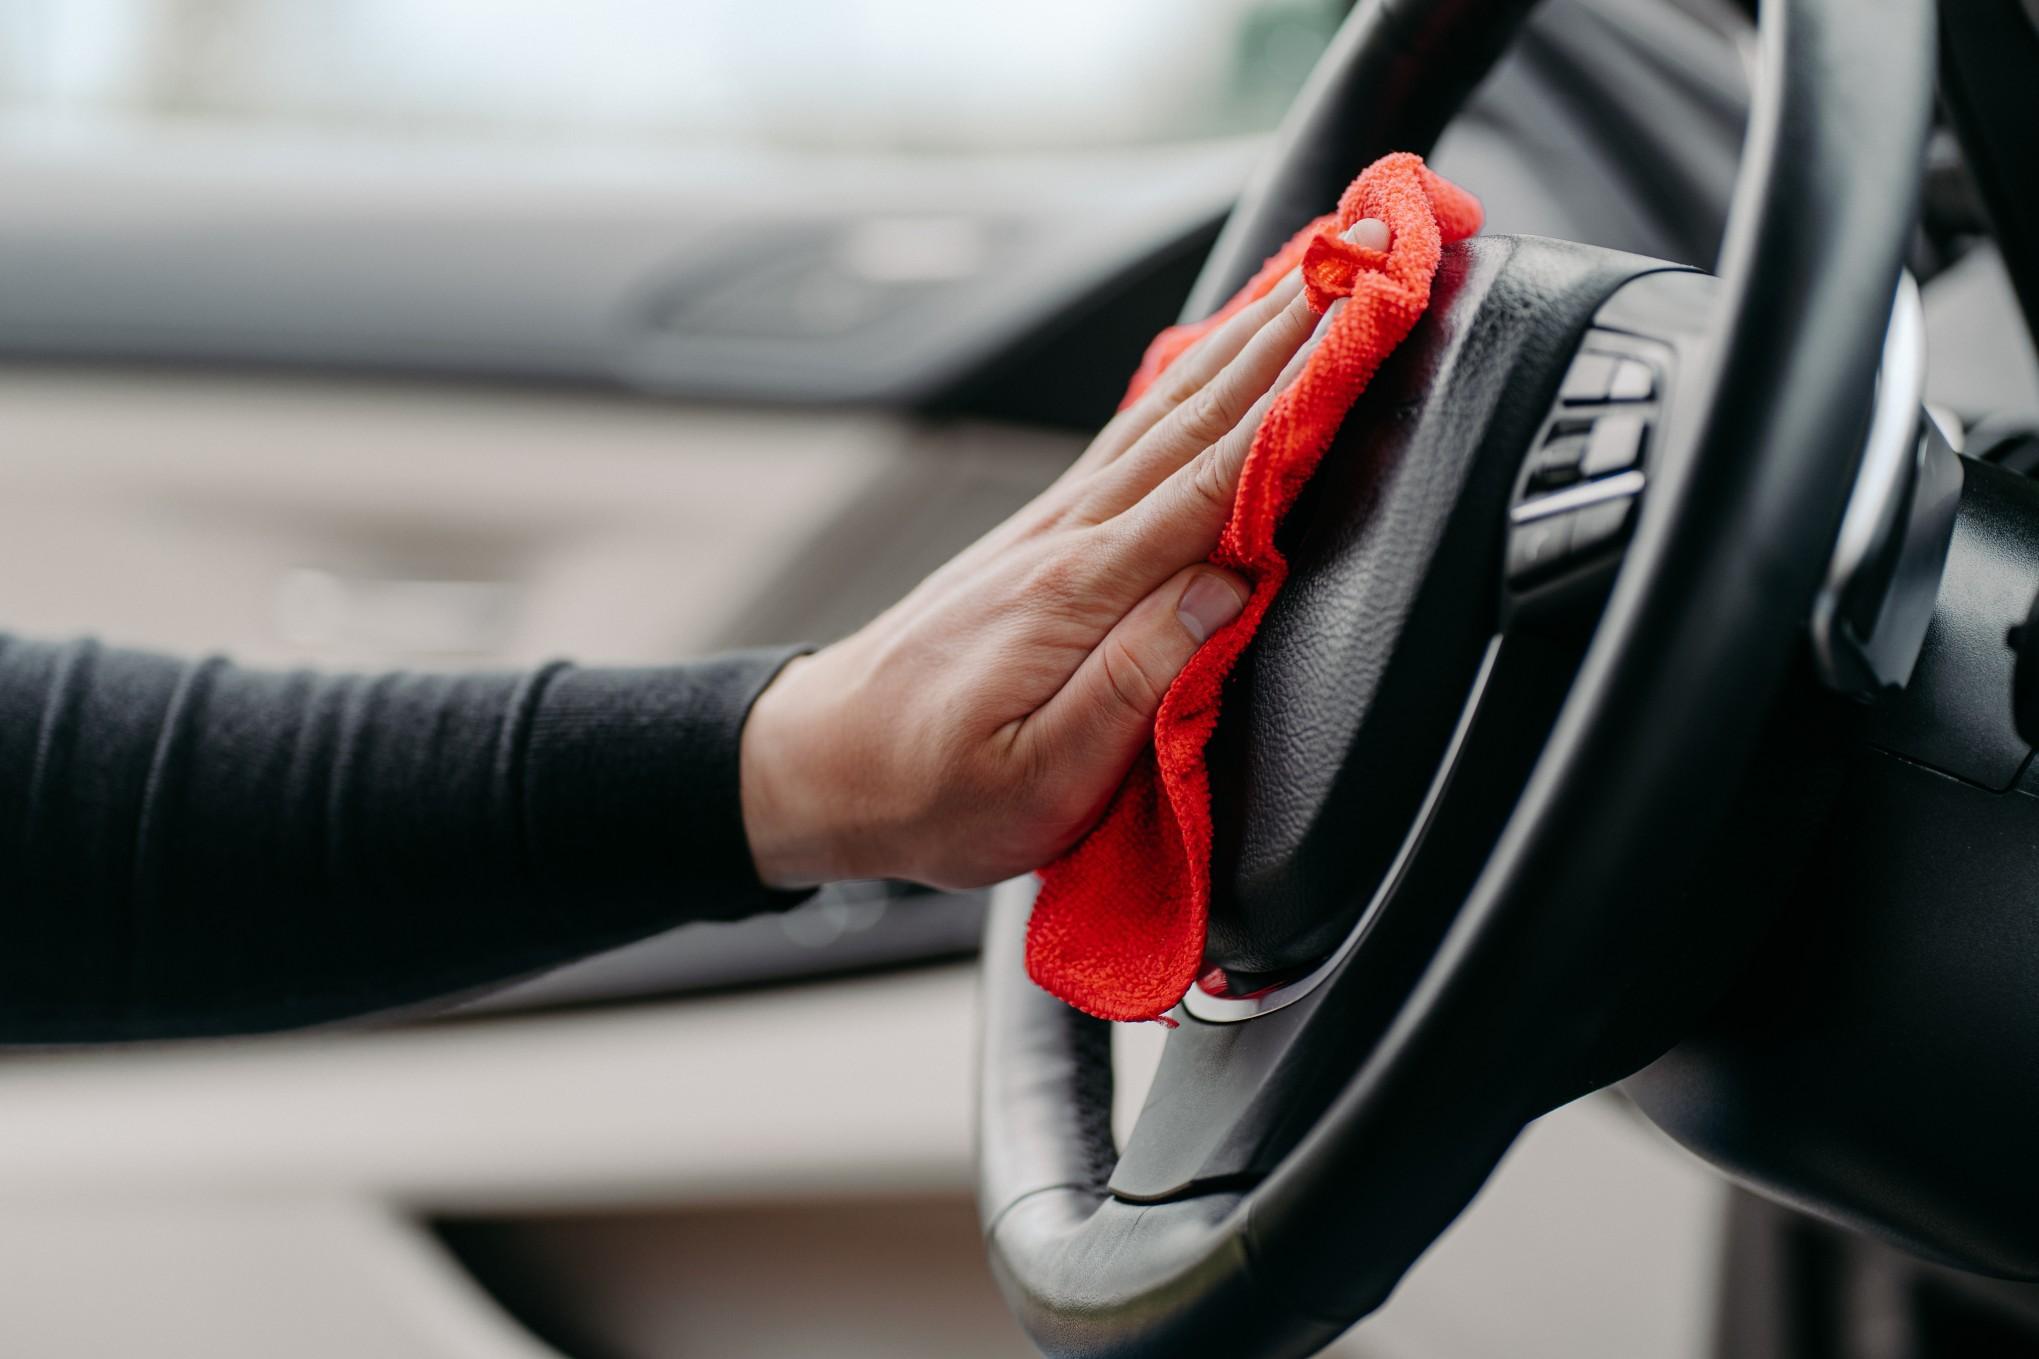 Keeping your car’s interior clean is a constant battle.